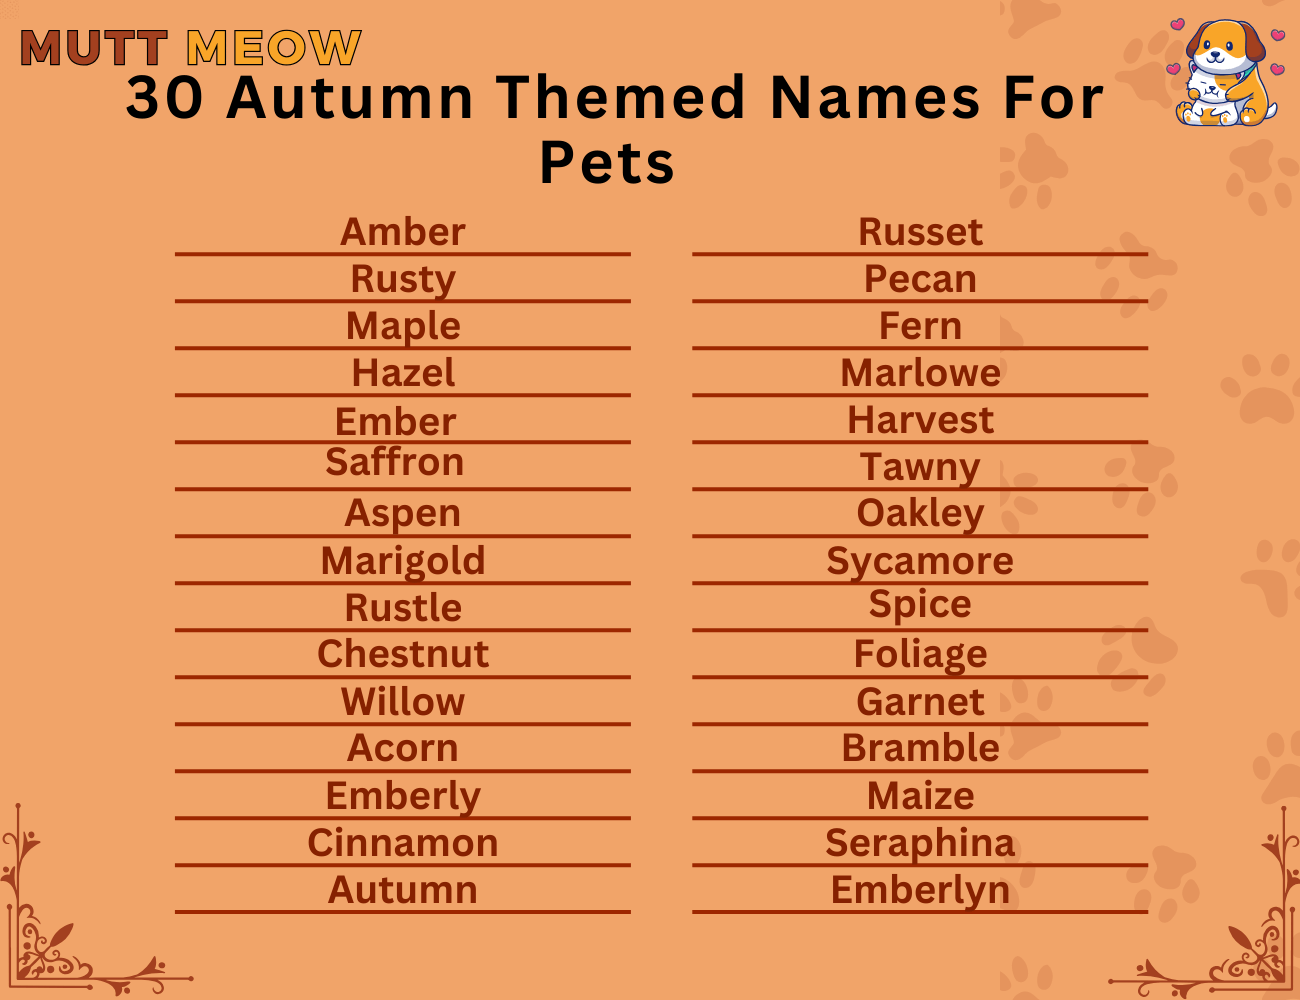 Autumn Themed Names For Pets